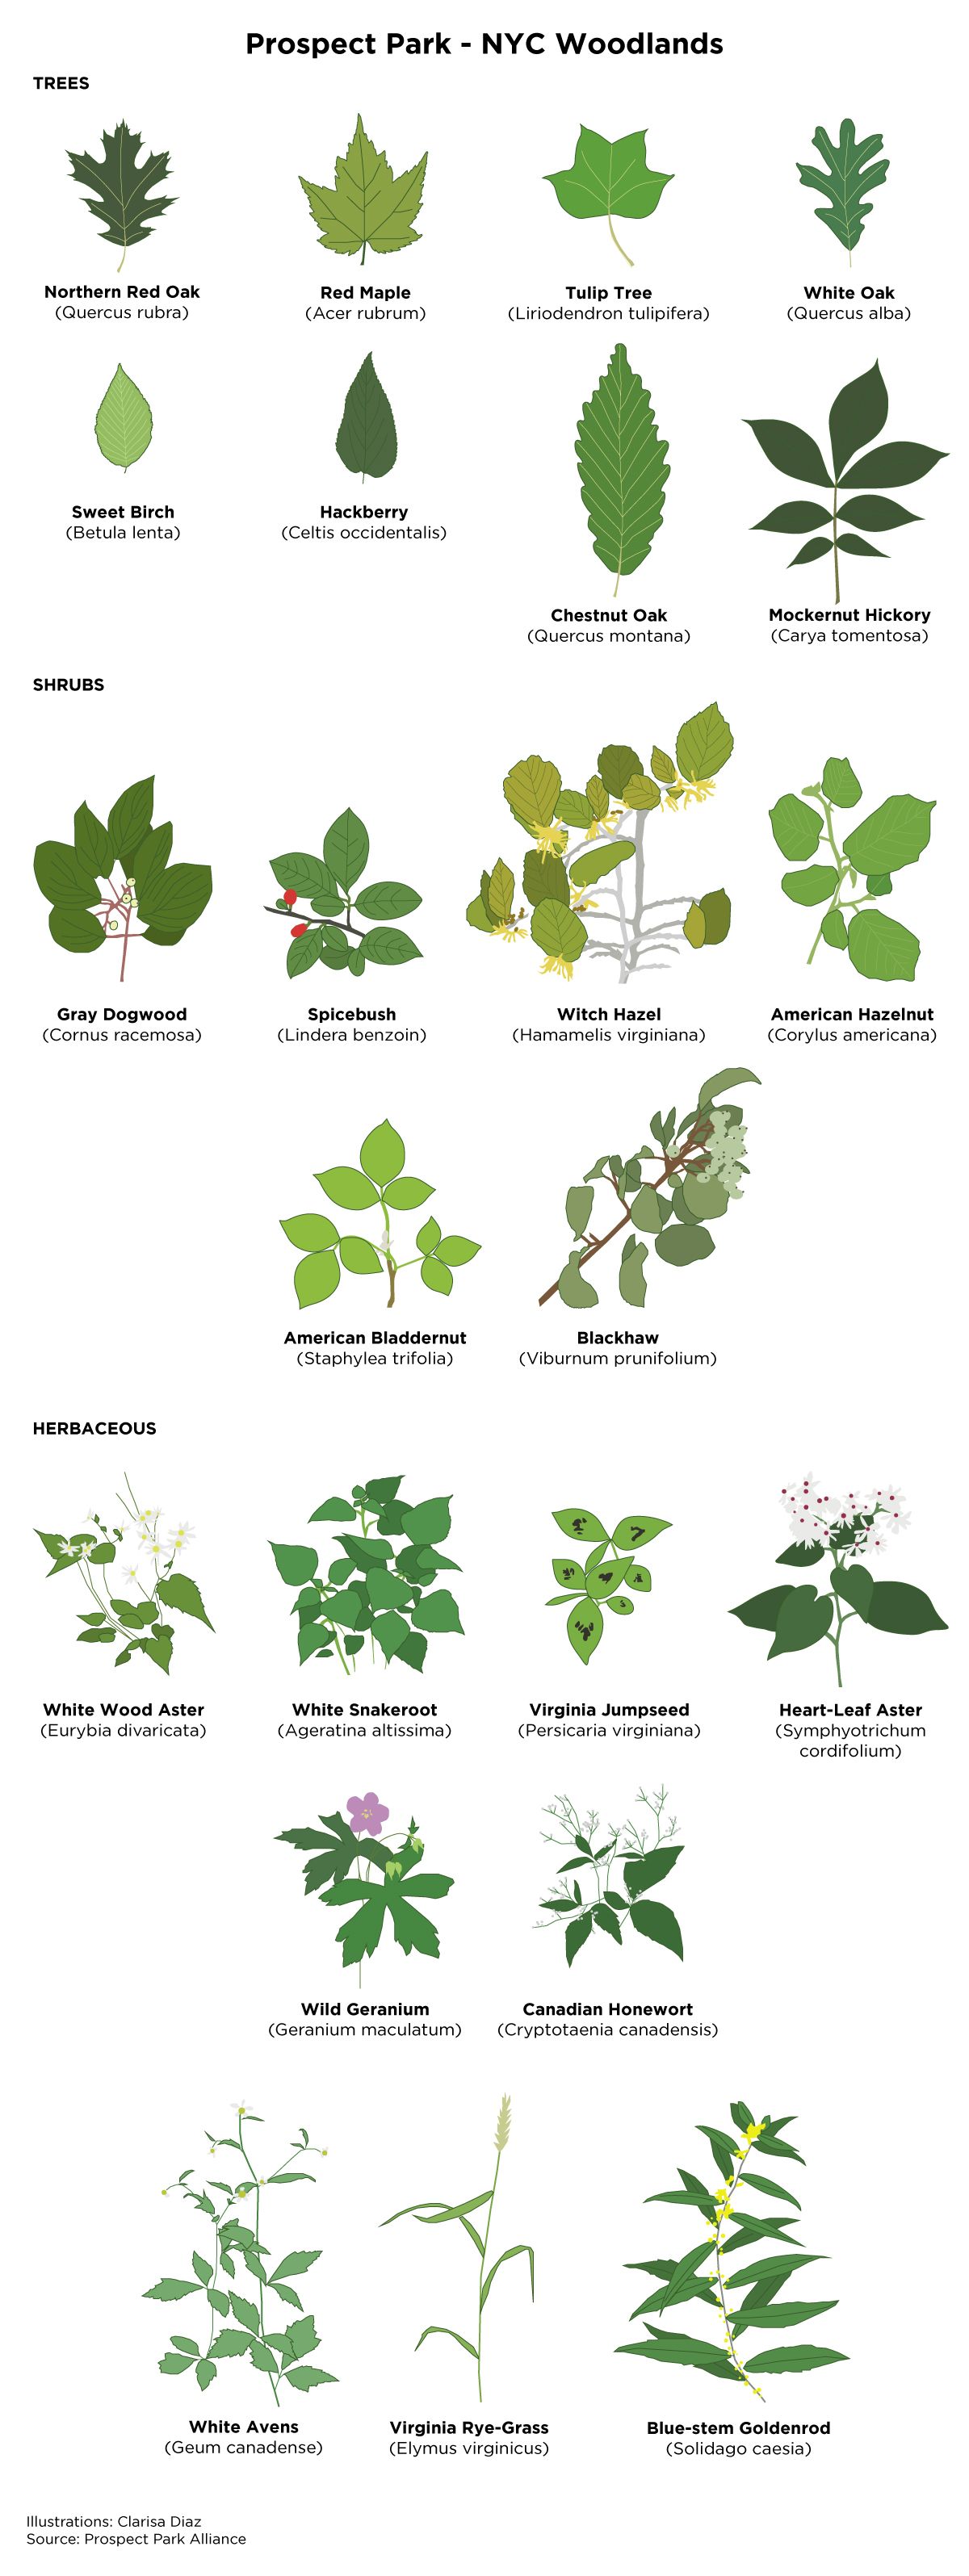 A typical plant palette for native woodland restoration in Prospect Park. Illustrations by Clarisa Diaz with information provided by Prospect Park Alliance. United States, 2020.
